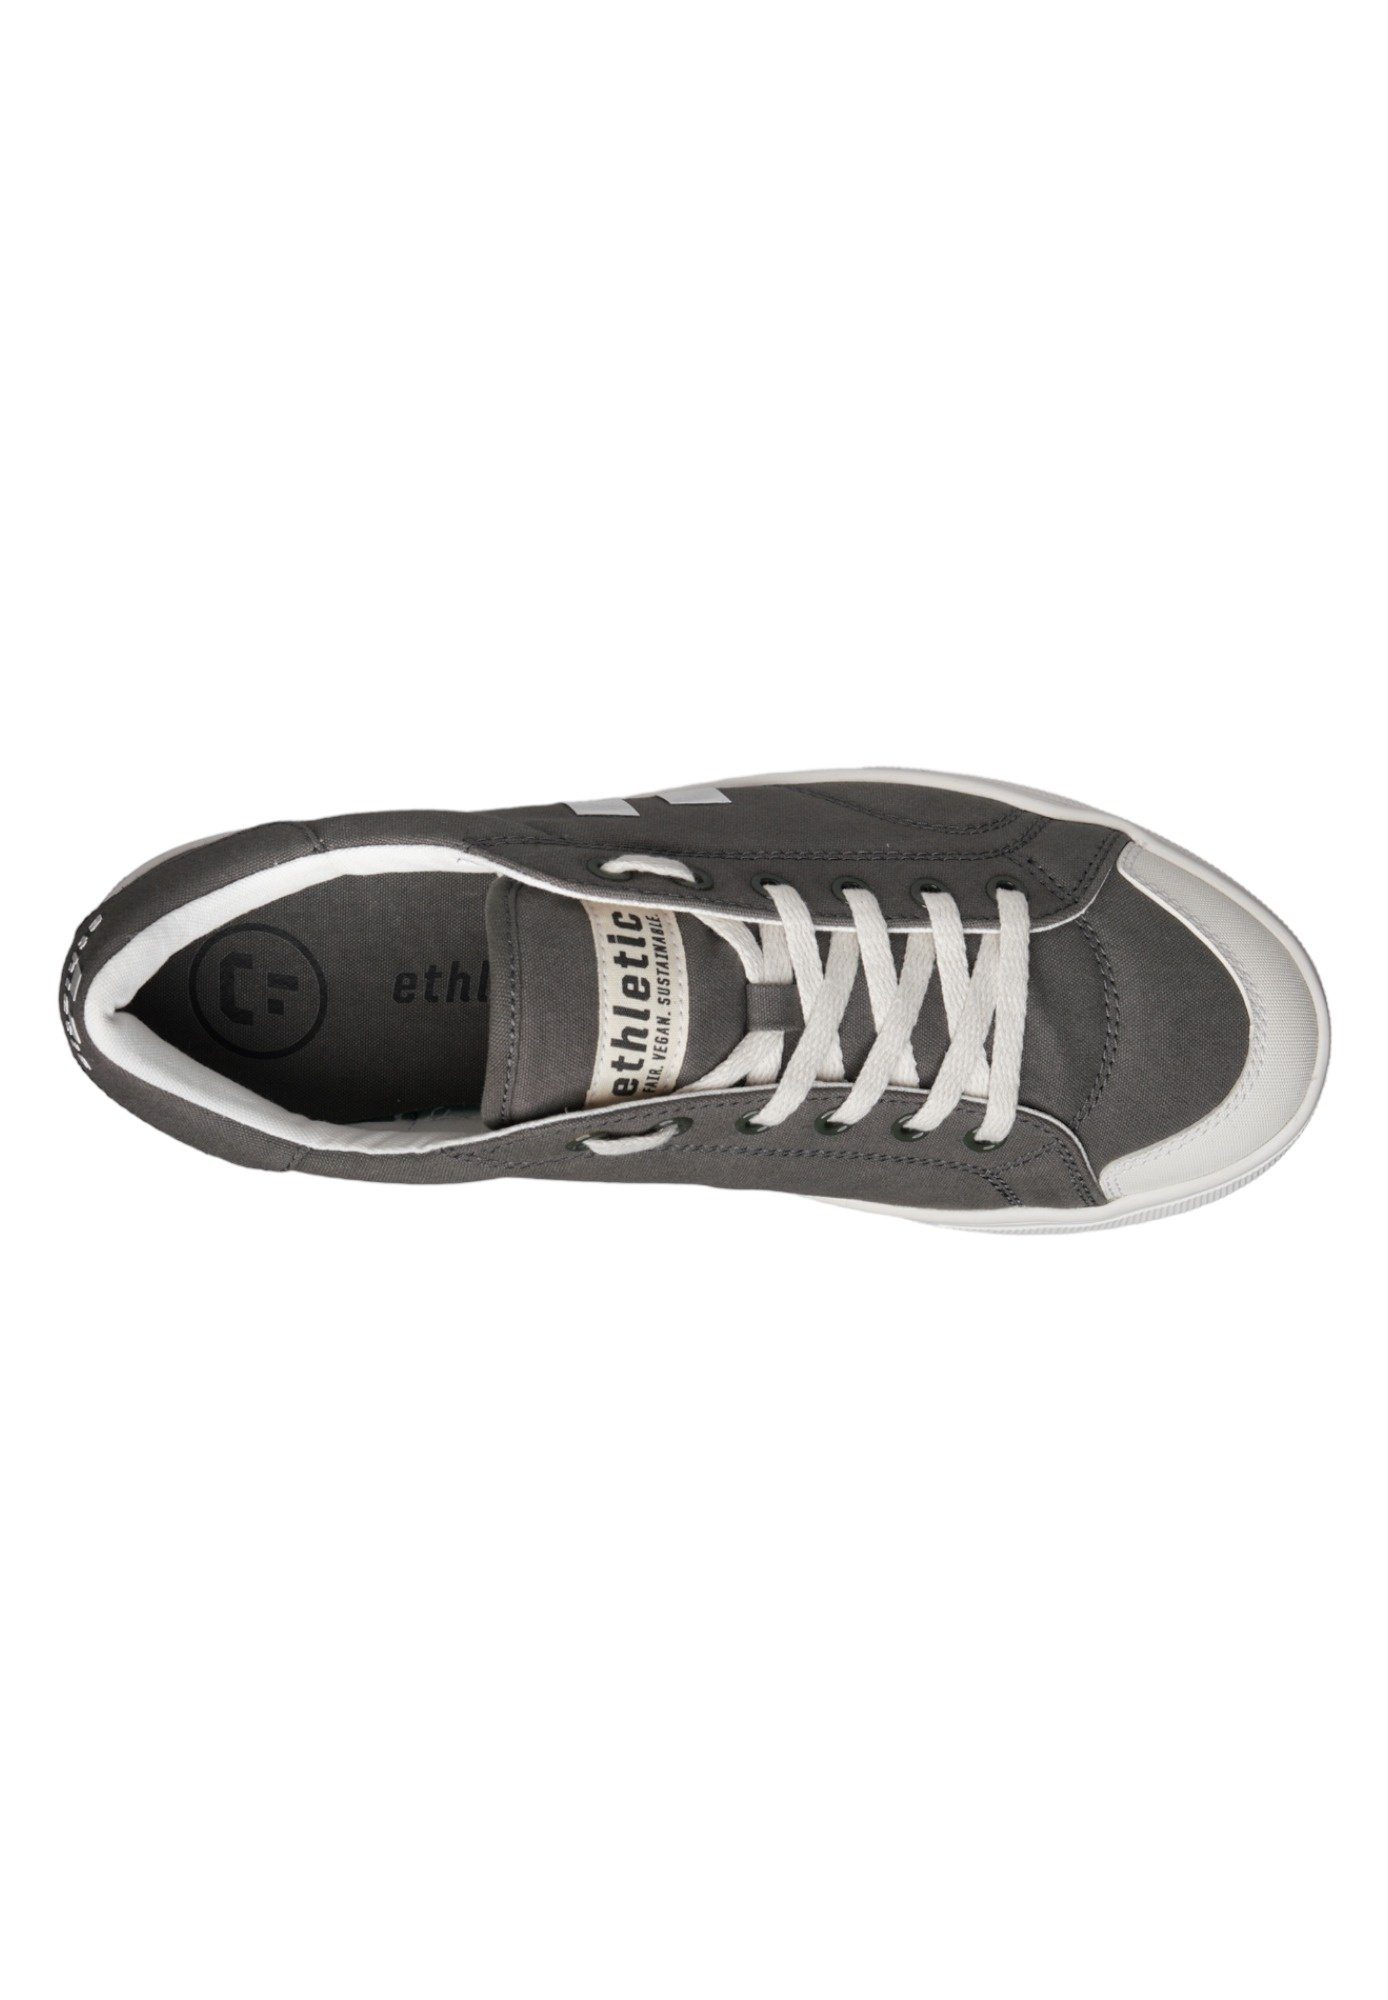 Lo Grey White Just - Active Fairtrade Produkt Cut Donkey Sneaker ETHLETIC